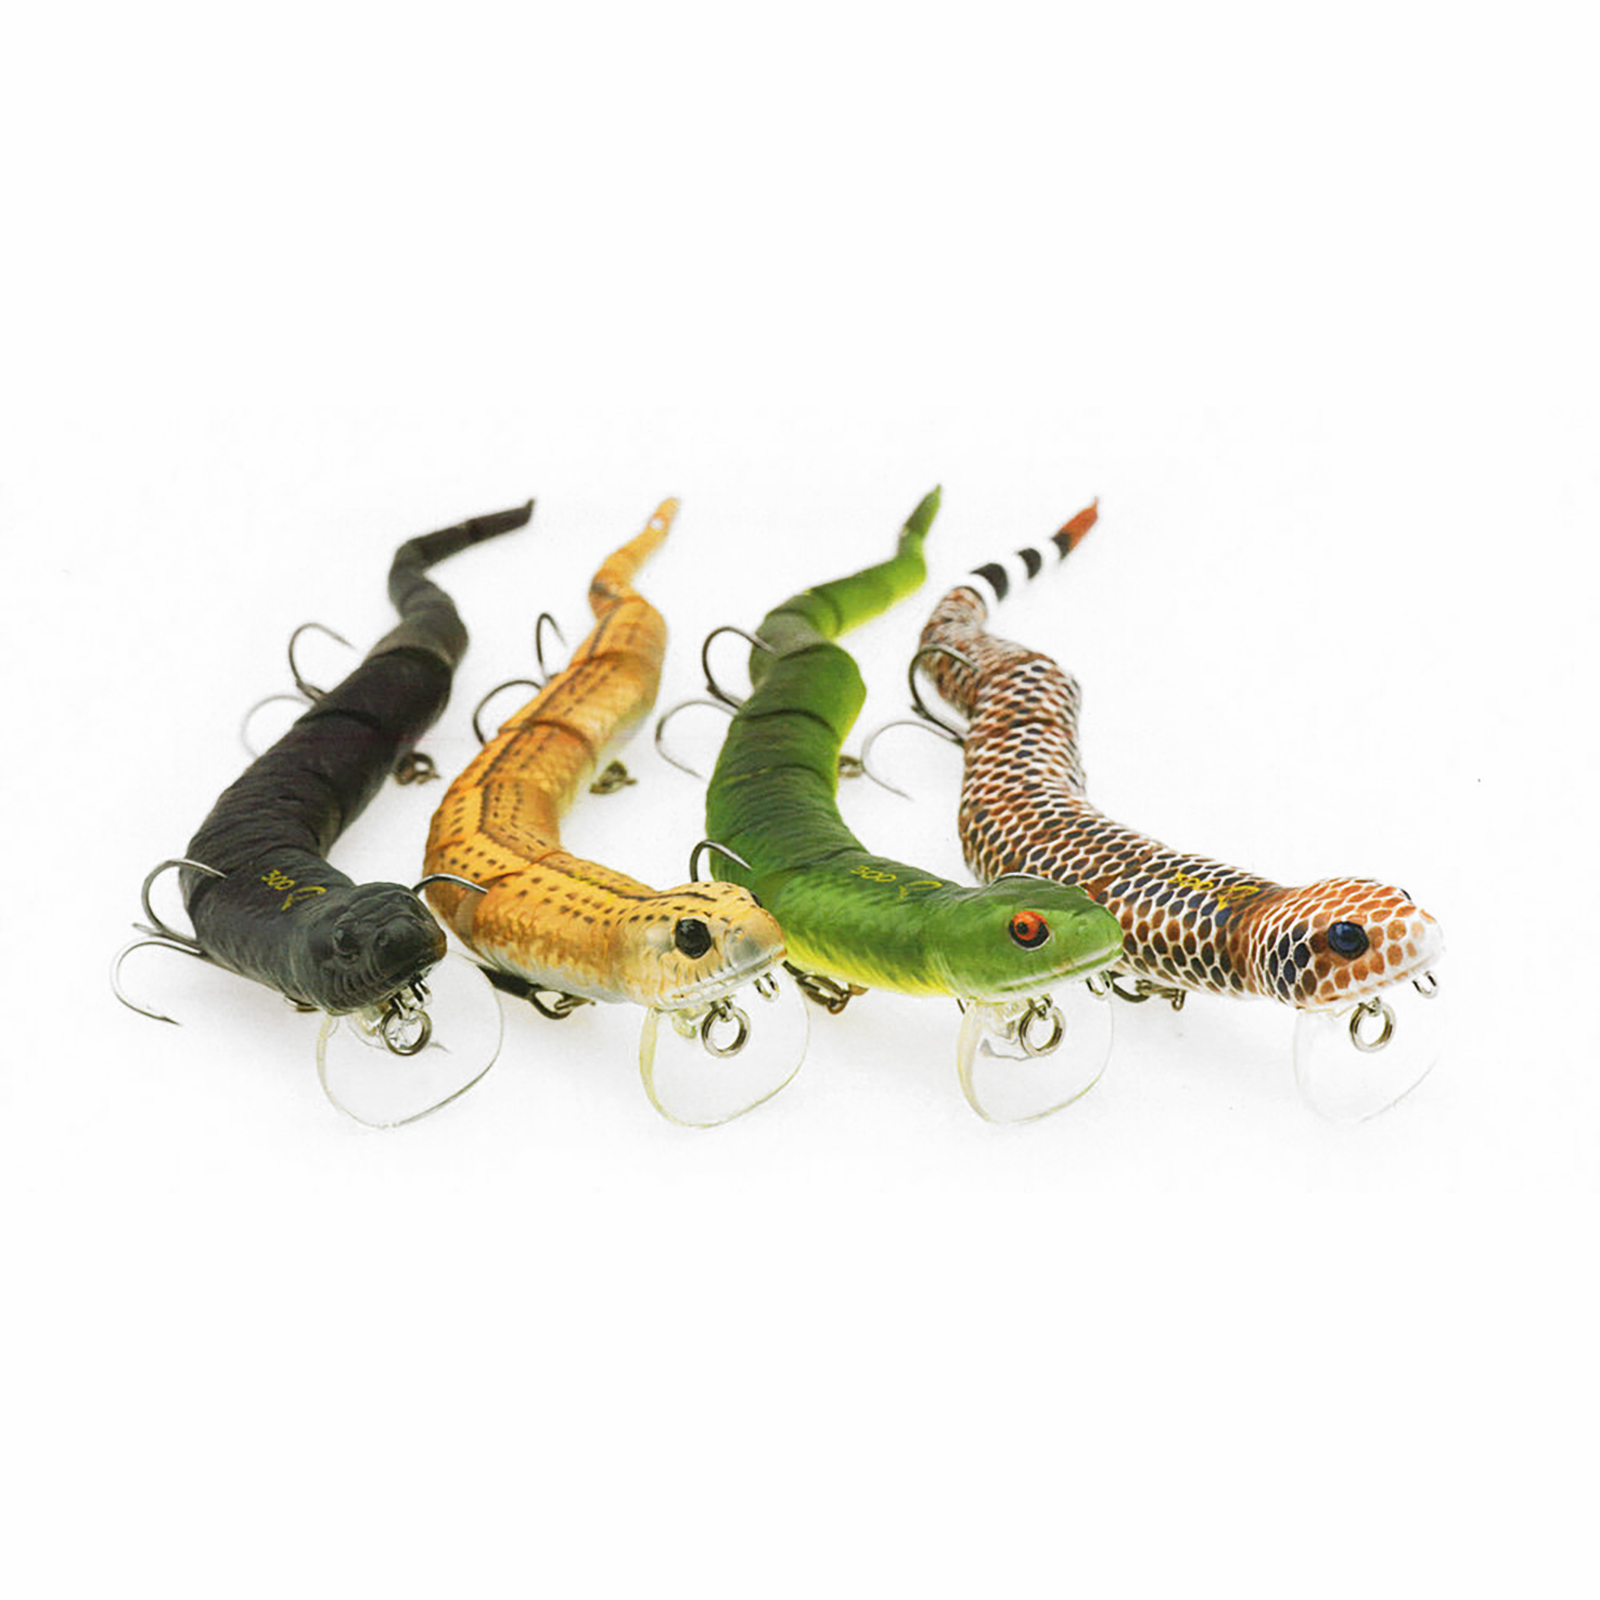 Savage Gear 3D Wake Snake Fishing Bait, 2 oz, Green Snake, Realistic  Contours, Colors & Movement, Durable Construction, Versatile Rigging  Options